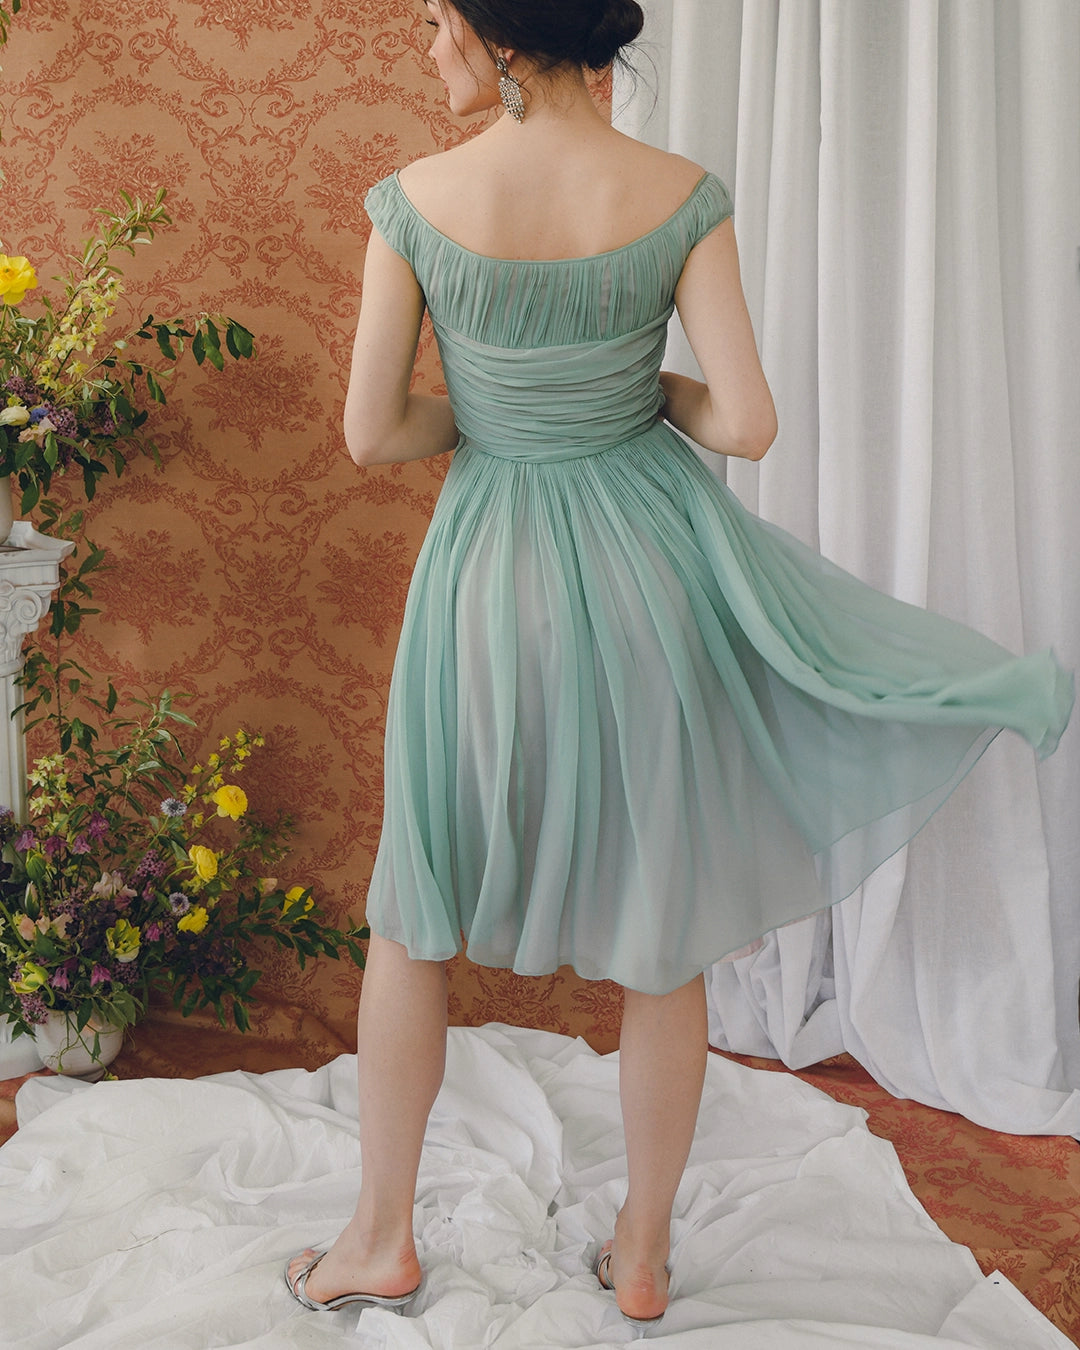 VINTAGE 1950s GATHERED SILK CHIFFON FIT-AND-FLARE DRESS